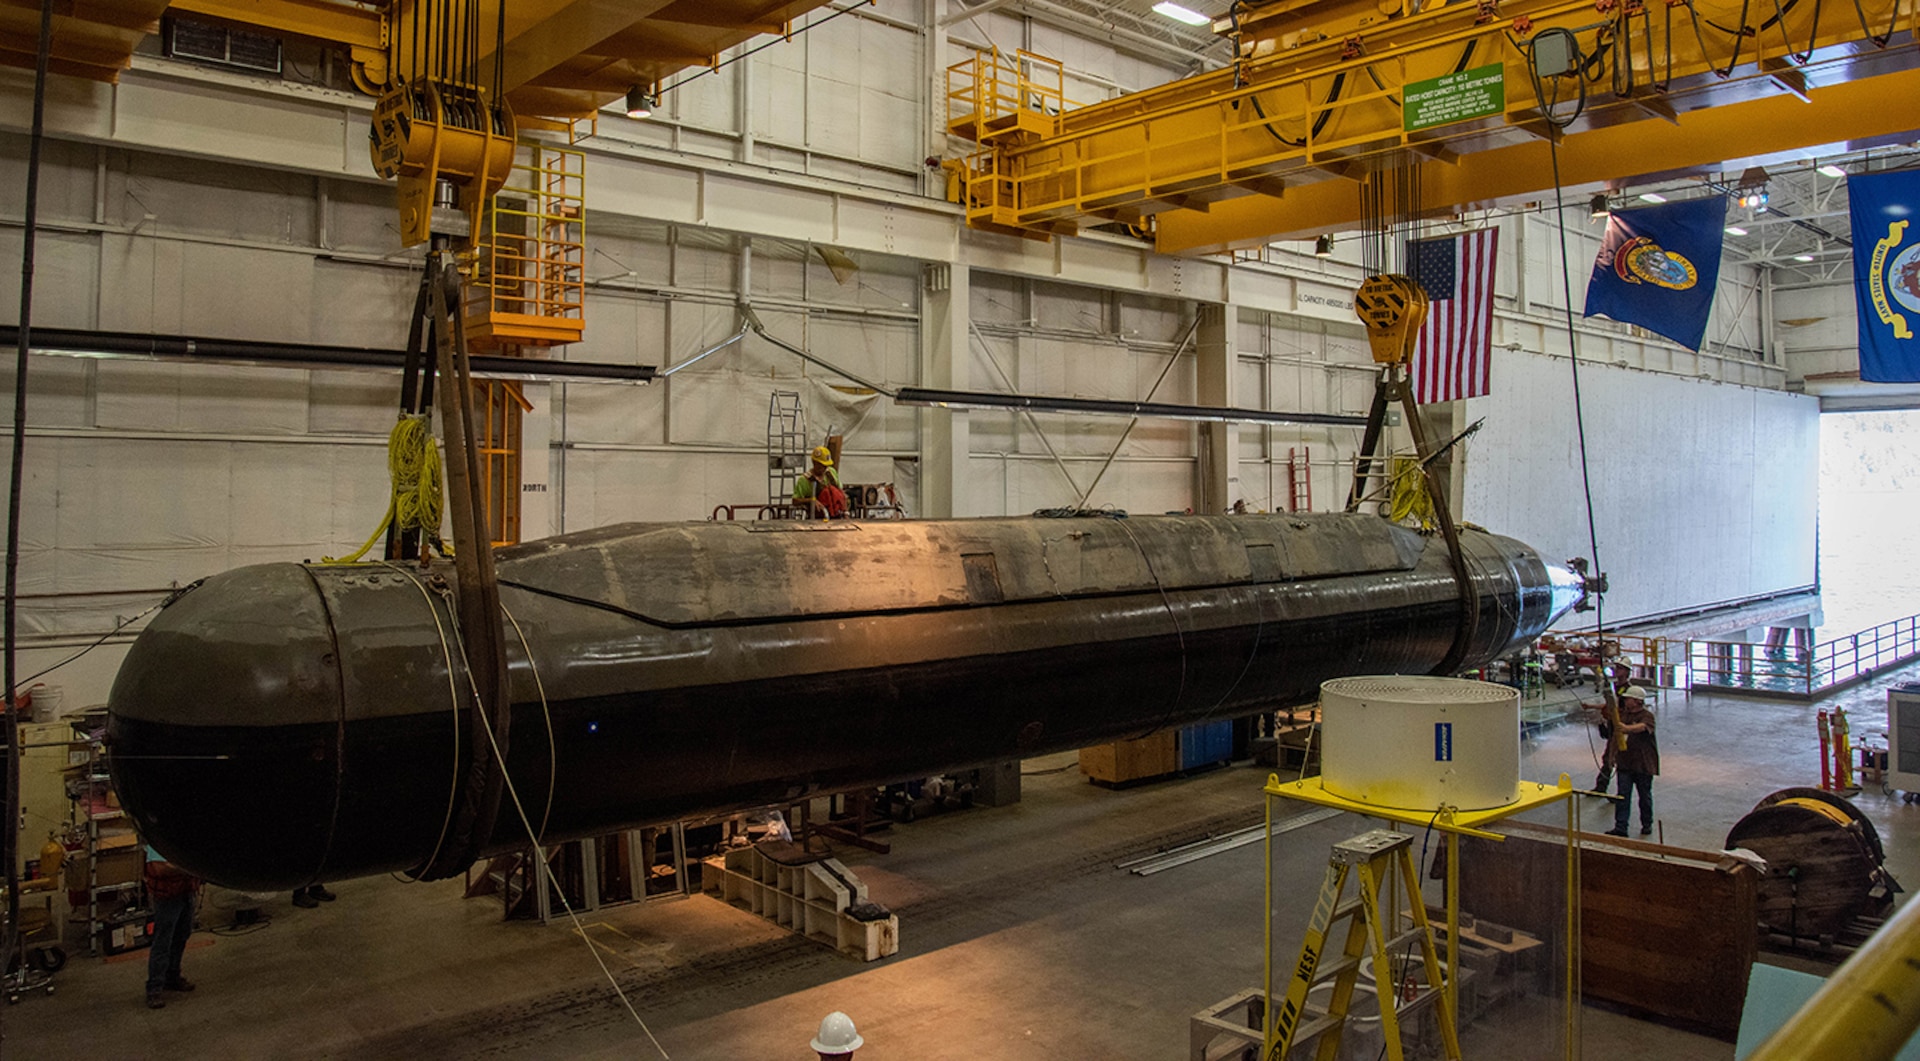 The Pike model, a scaled-size Columbia-class submarine model, is lifted from Lake Pend Oreille.